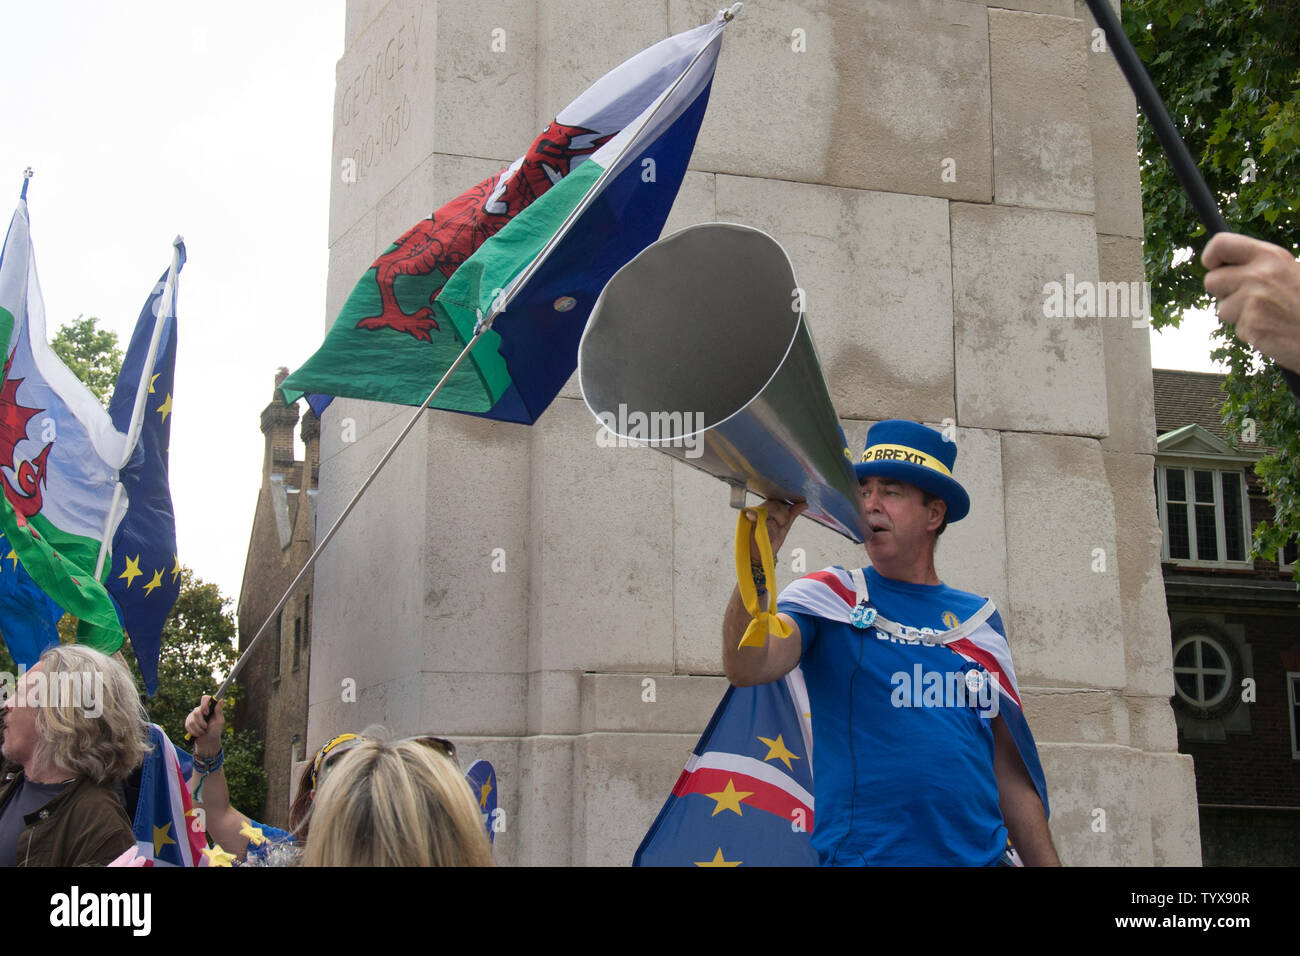 26 June 2019 - Opposite Parliament, London, UK - 'Stop Brexit' Steven Bray with megaphone at his birthday party. Stock Photo